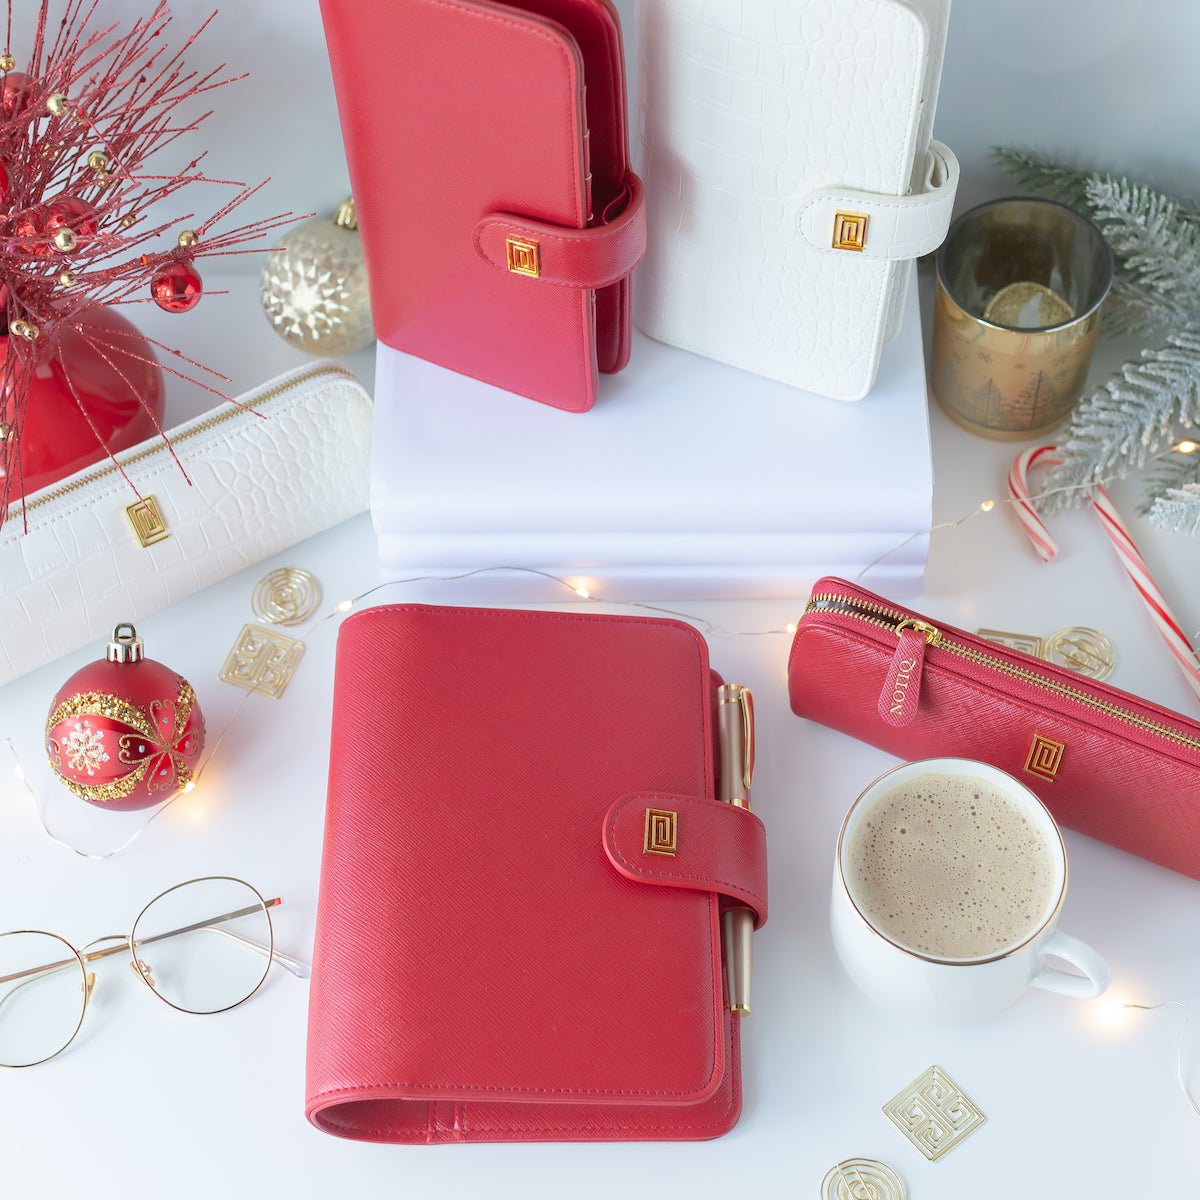 Enjoy Quick and Easy Holiday Shopping with NOTIQ's Gift Guide - NOTIQ